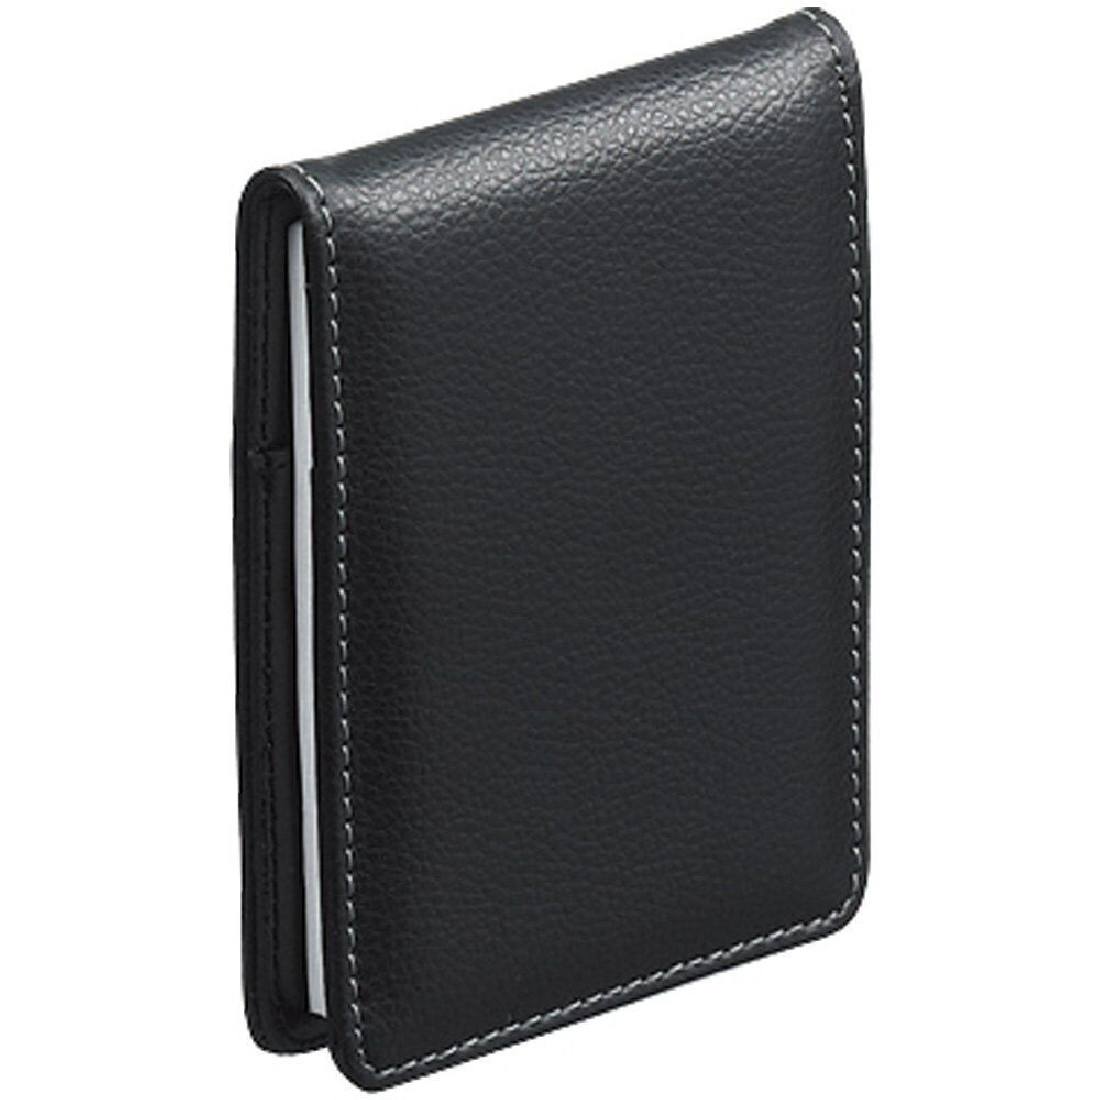 Mnemosyne Μemo Pad plus Synthetic Leather Holder HN179UA-05 A7 65sheets 5mm squared 80gr